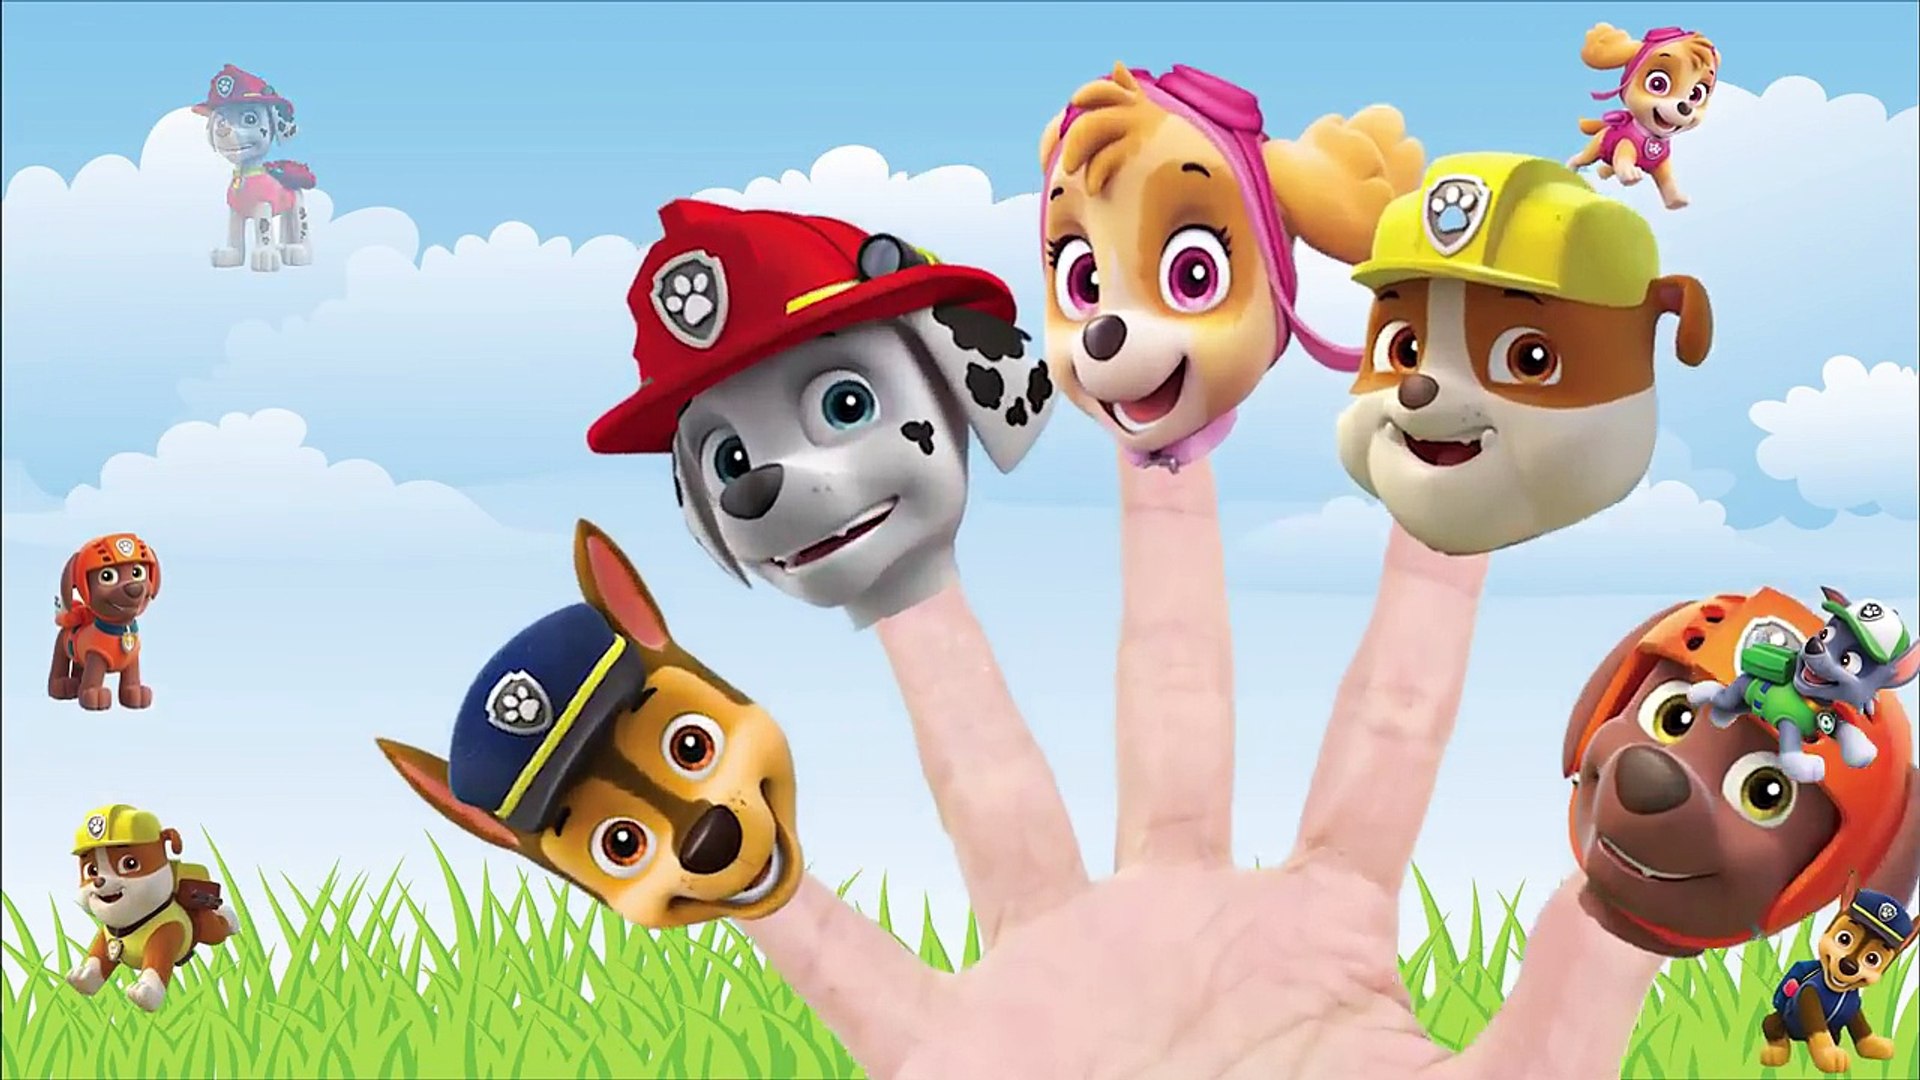 Paw Patrol Ryders Puppy Pad with Chase, Marshall, Skyle, Rocky, Zuma,  Rubble Nickelodeon toys - video Dailymotion